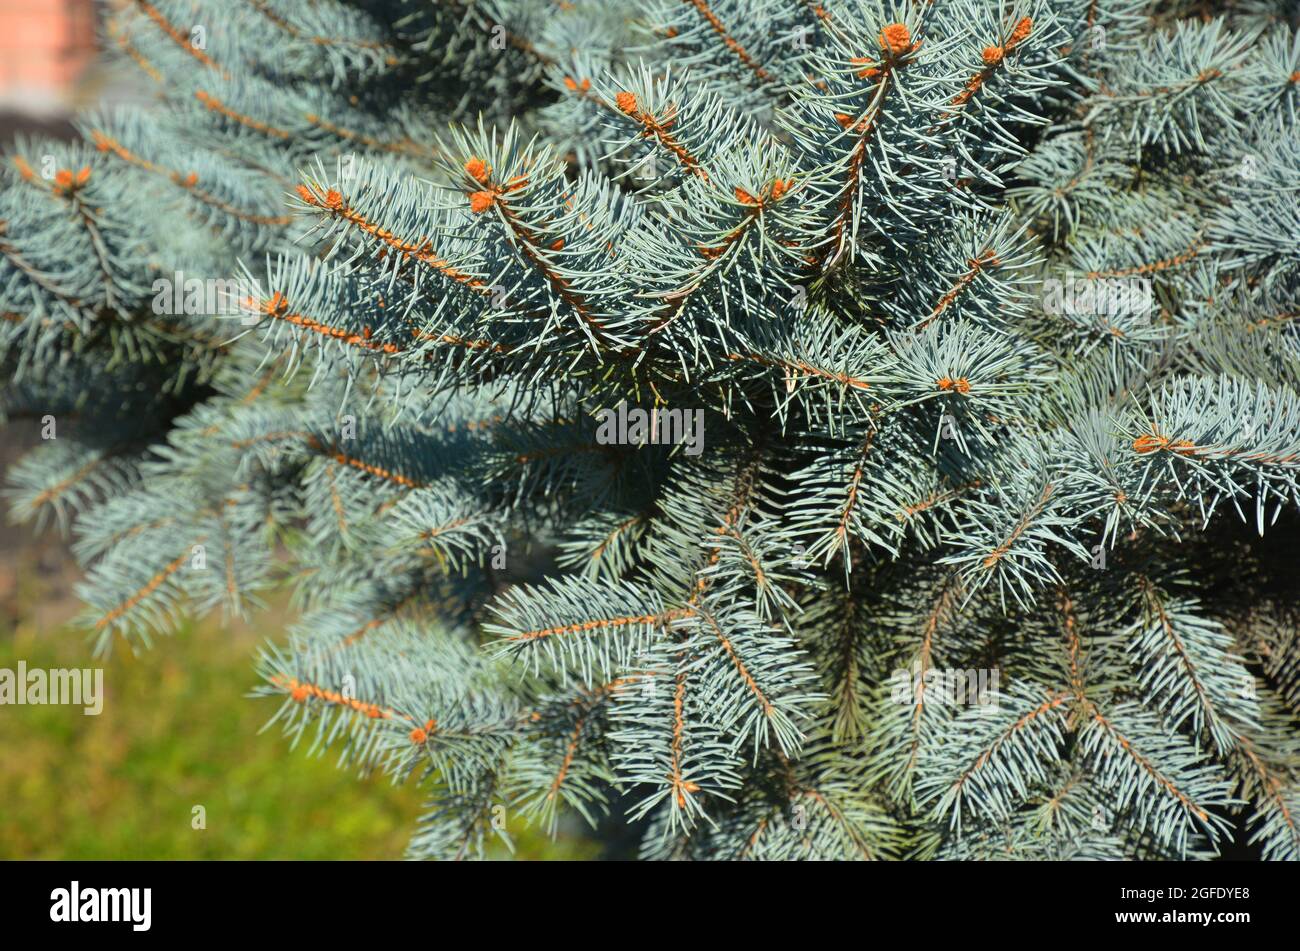 A close-up of a healthy Colorado blue spruce, evergreen coniferous tree with densely growing branches with blue-green needles. Stock Photo